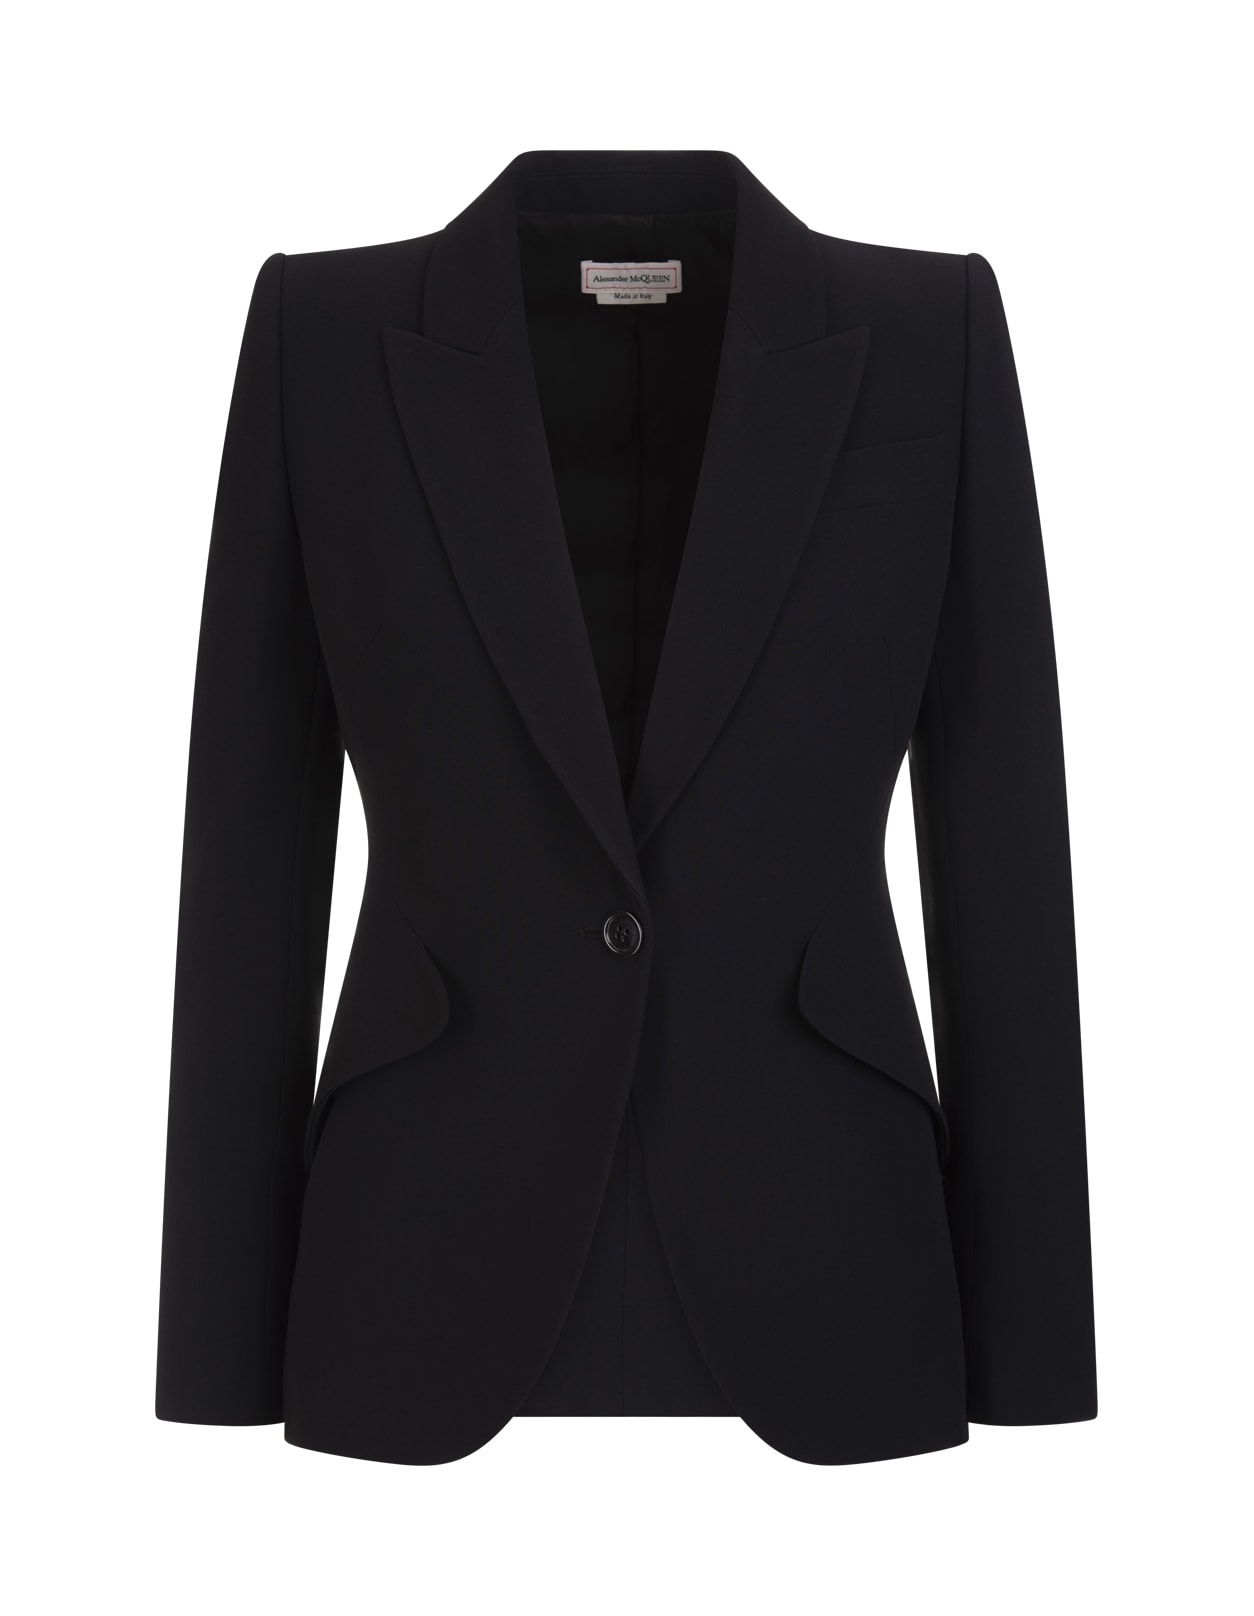 Alexander McQueen Woman Black Jacket In Thin Crepe With Pointed Shoulders